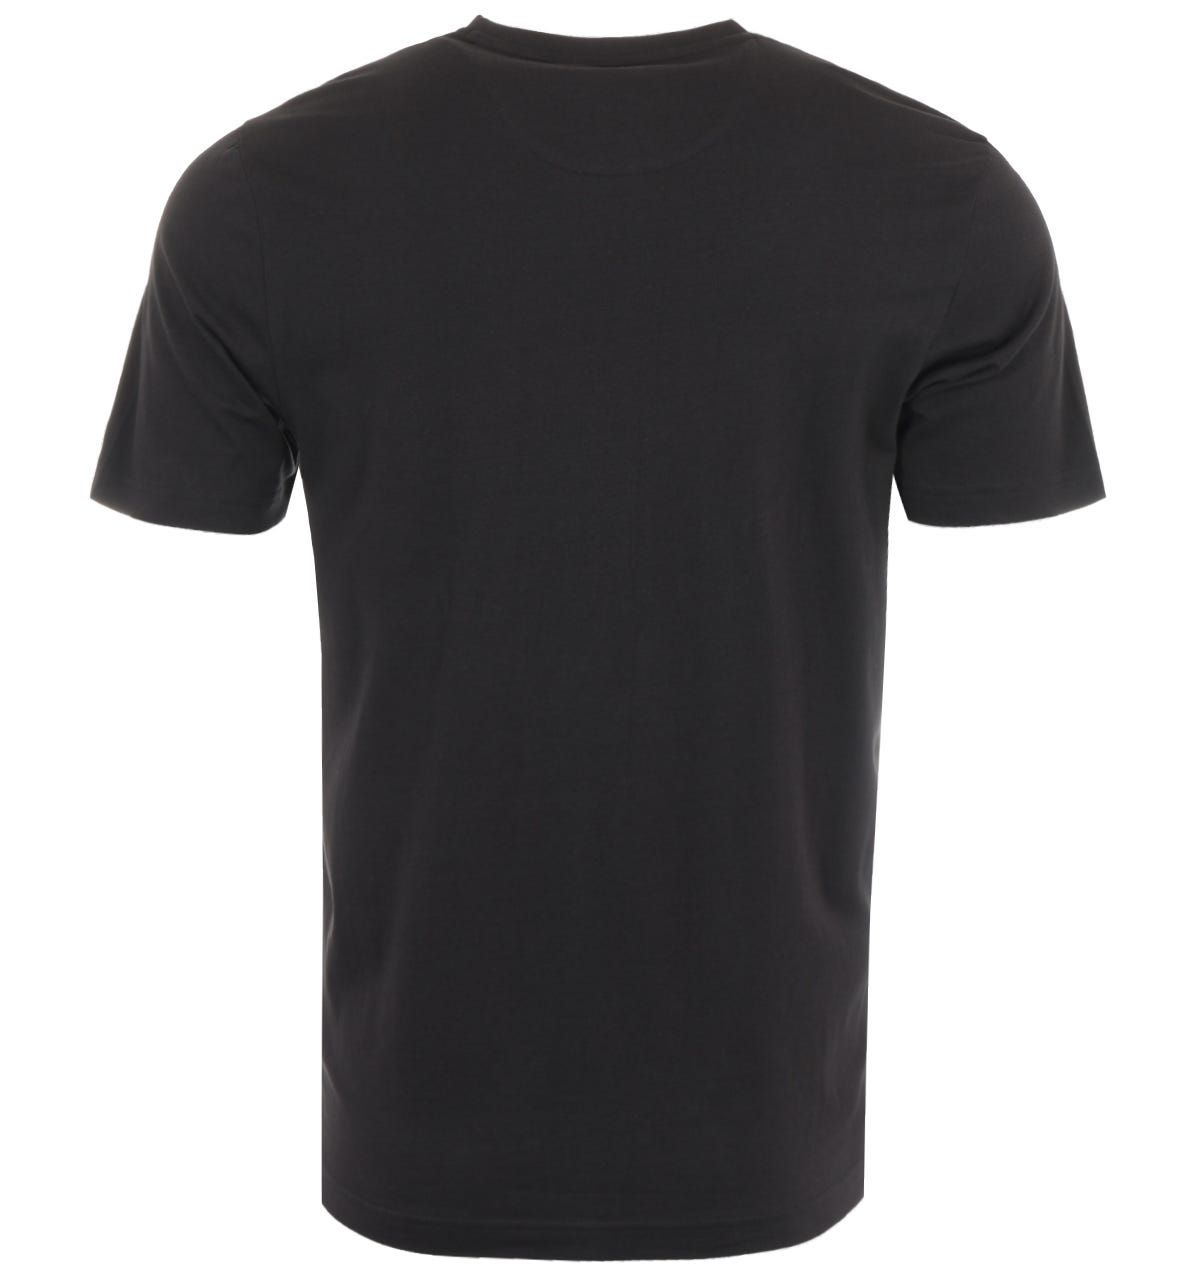 Crafted from pure organic cotton, the Eddie T-shirt from Farah is fitted with a bound ribbed crew neck and short sleeves. The design is finished with the iconic Farah logo embroidered at the chest. The perfect t-shirt to upgrade your wardrobe basics.Modern Fit, Pure Organic Cotton Soft Touch Jersey, Bound Ribbed Crew Neck , Short Sleeves, Farah Branding. Style & Fit:Modern Fit, Fits True to Size. Composition & Care:100% Organic Cotton, Machine Wash.